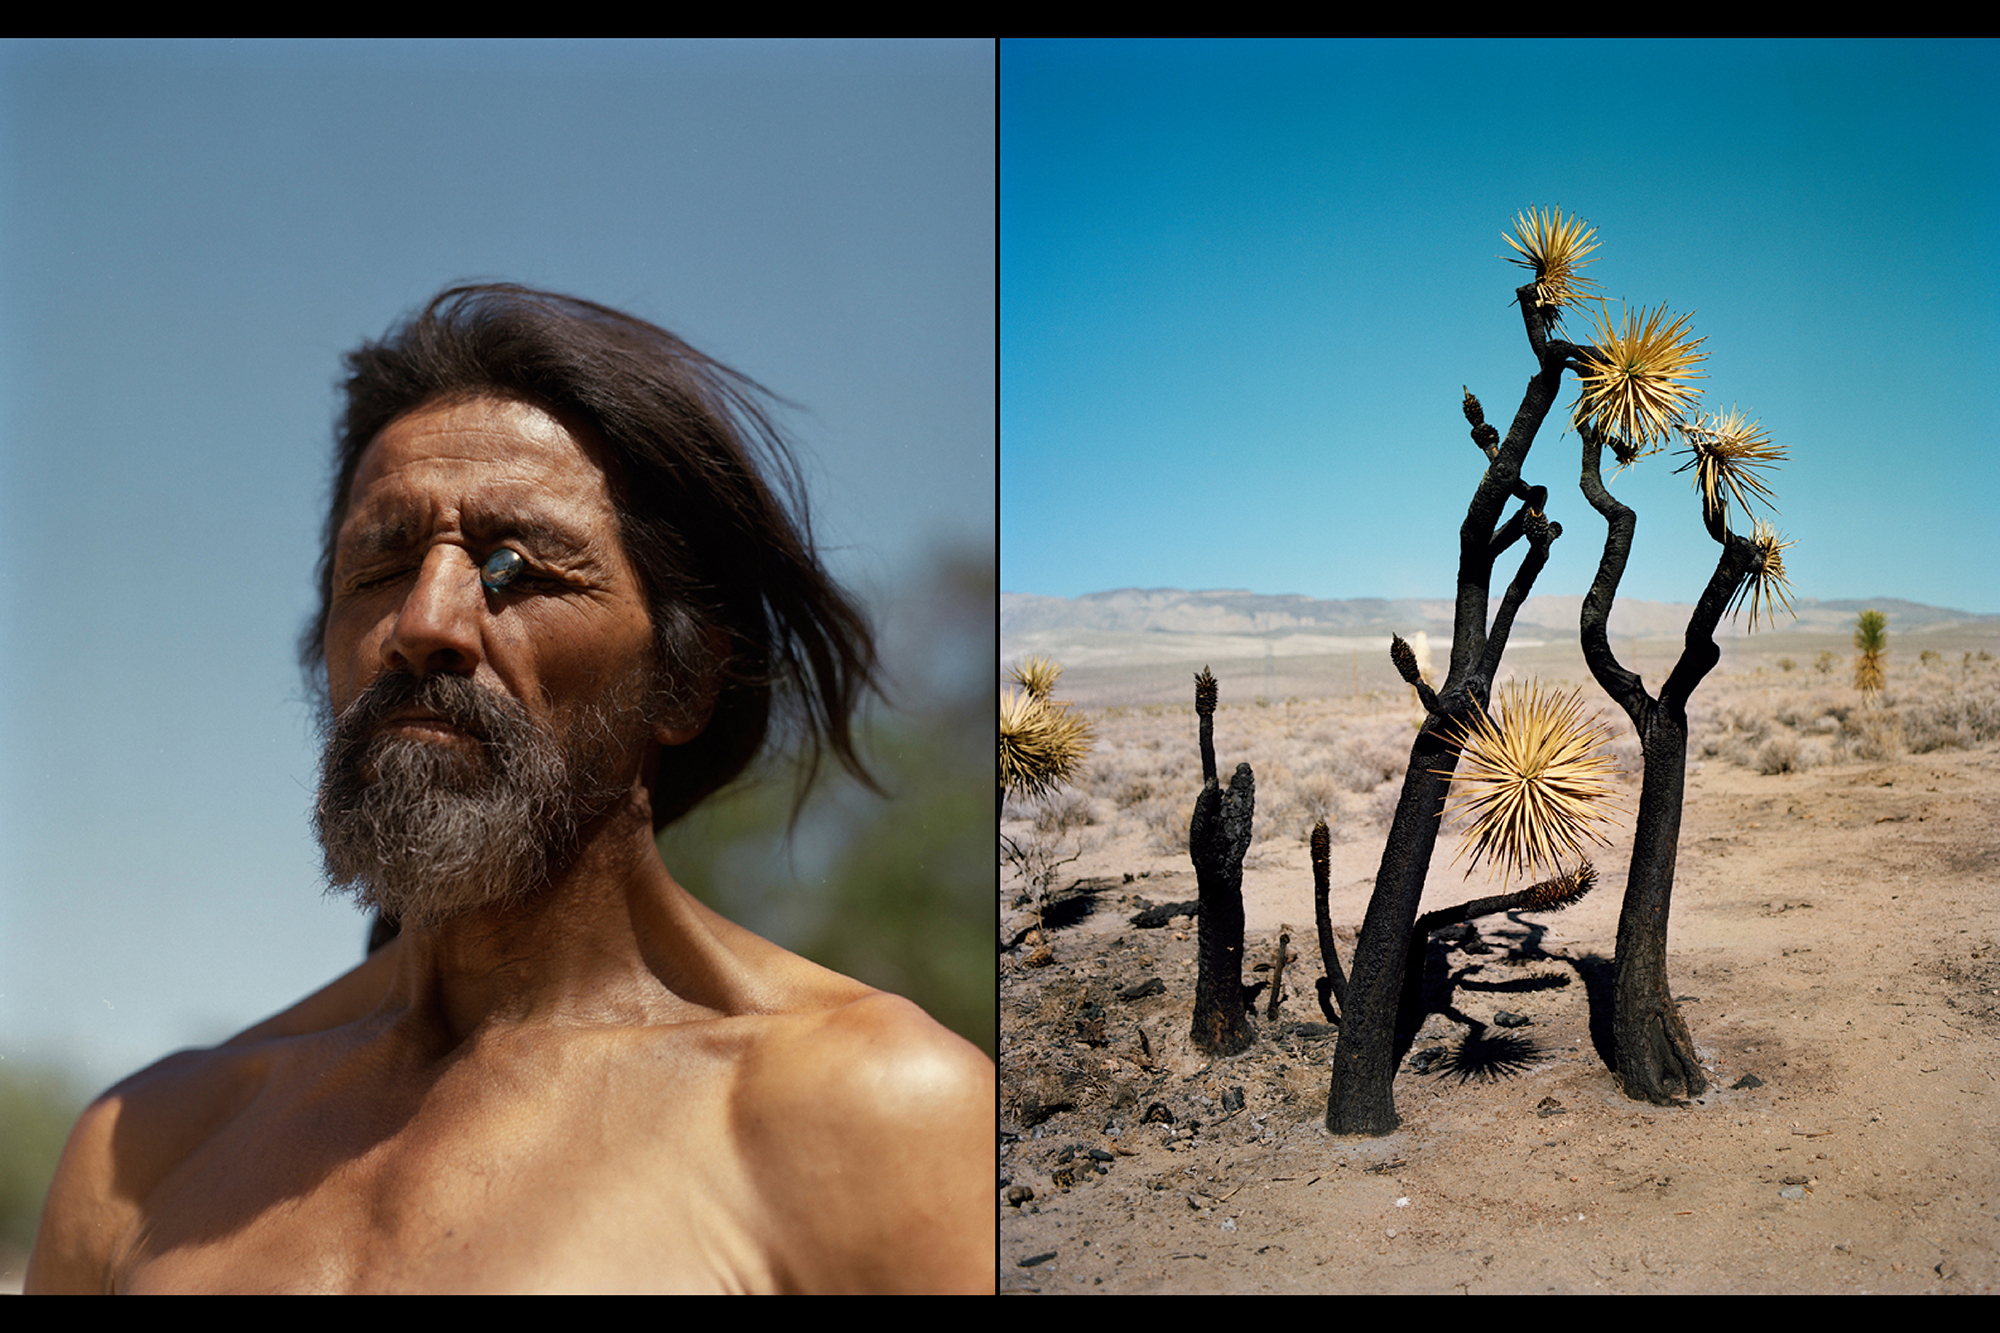 Side by side photos of images by Greg Halpern — one of a shirtless person with an object in their eye, the other of plants in a desert.